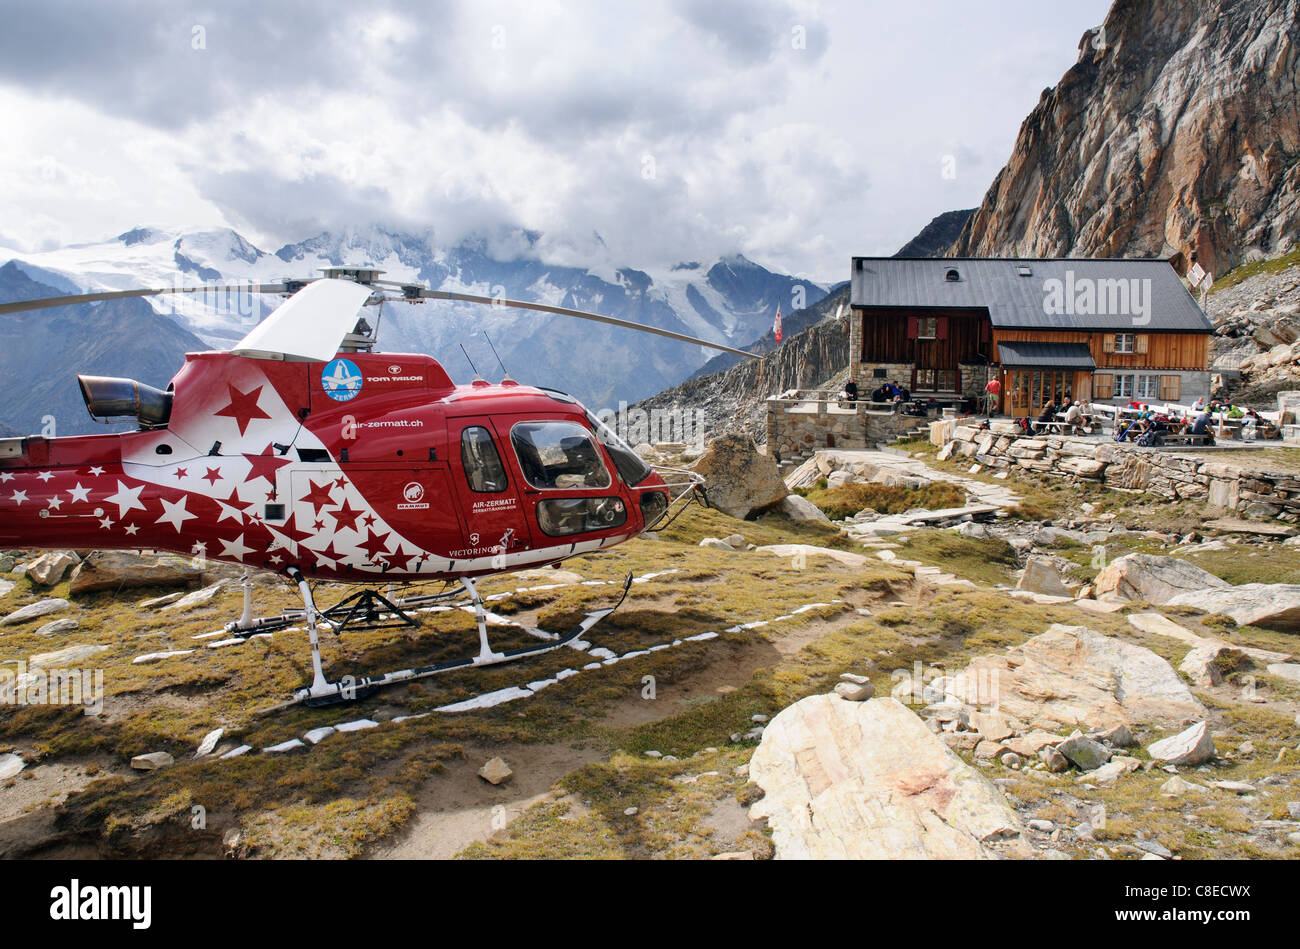 A rescue helicopter at the Almageller Hut in the Swiss Alps Stock Photo